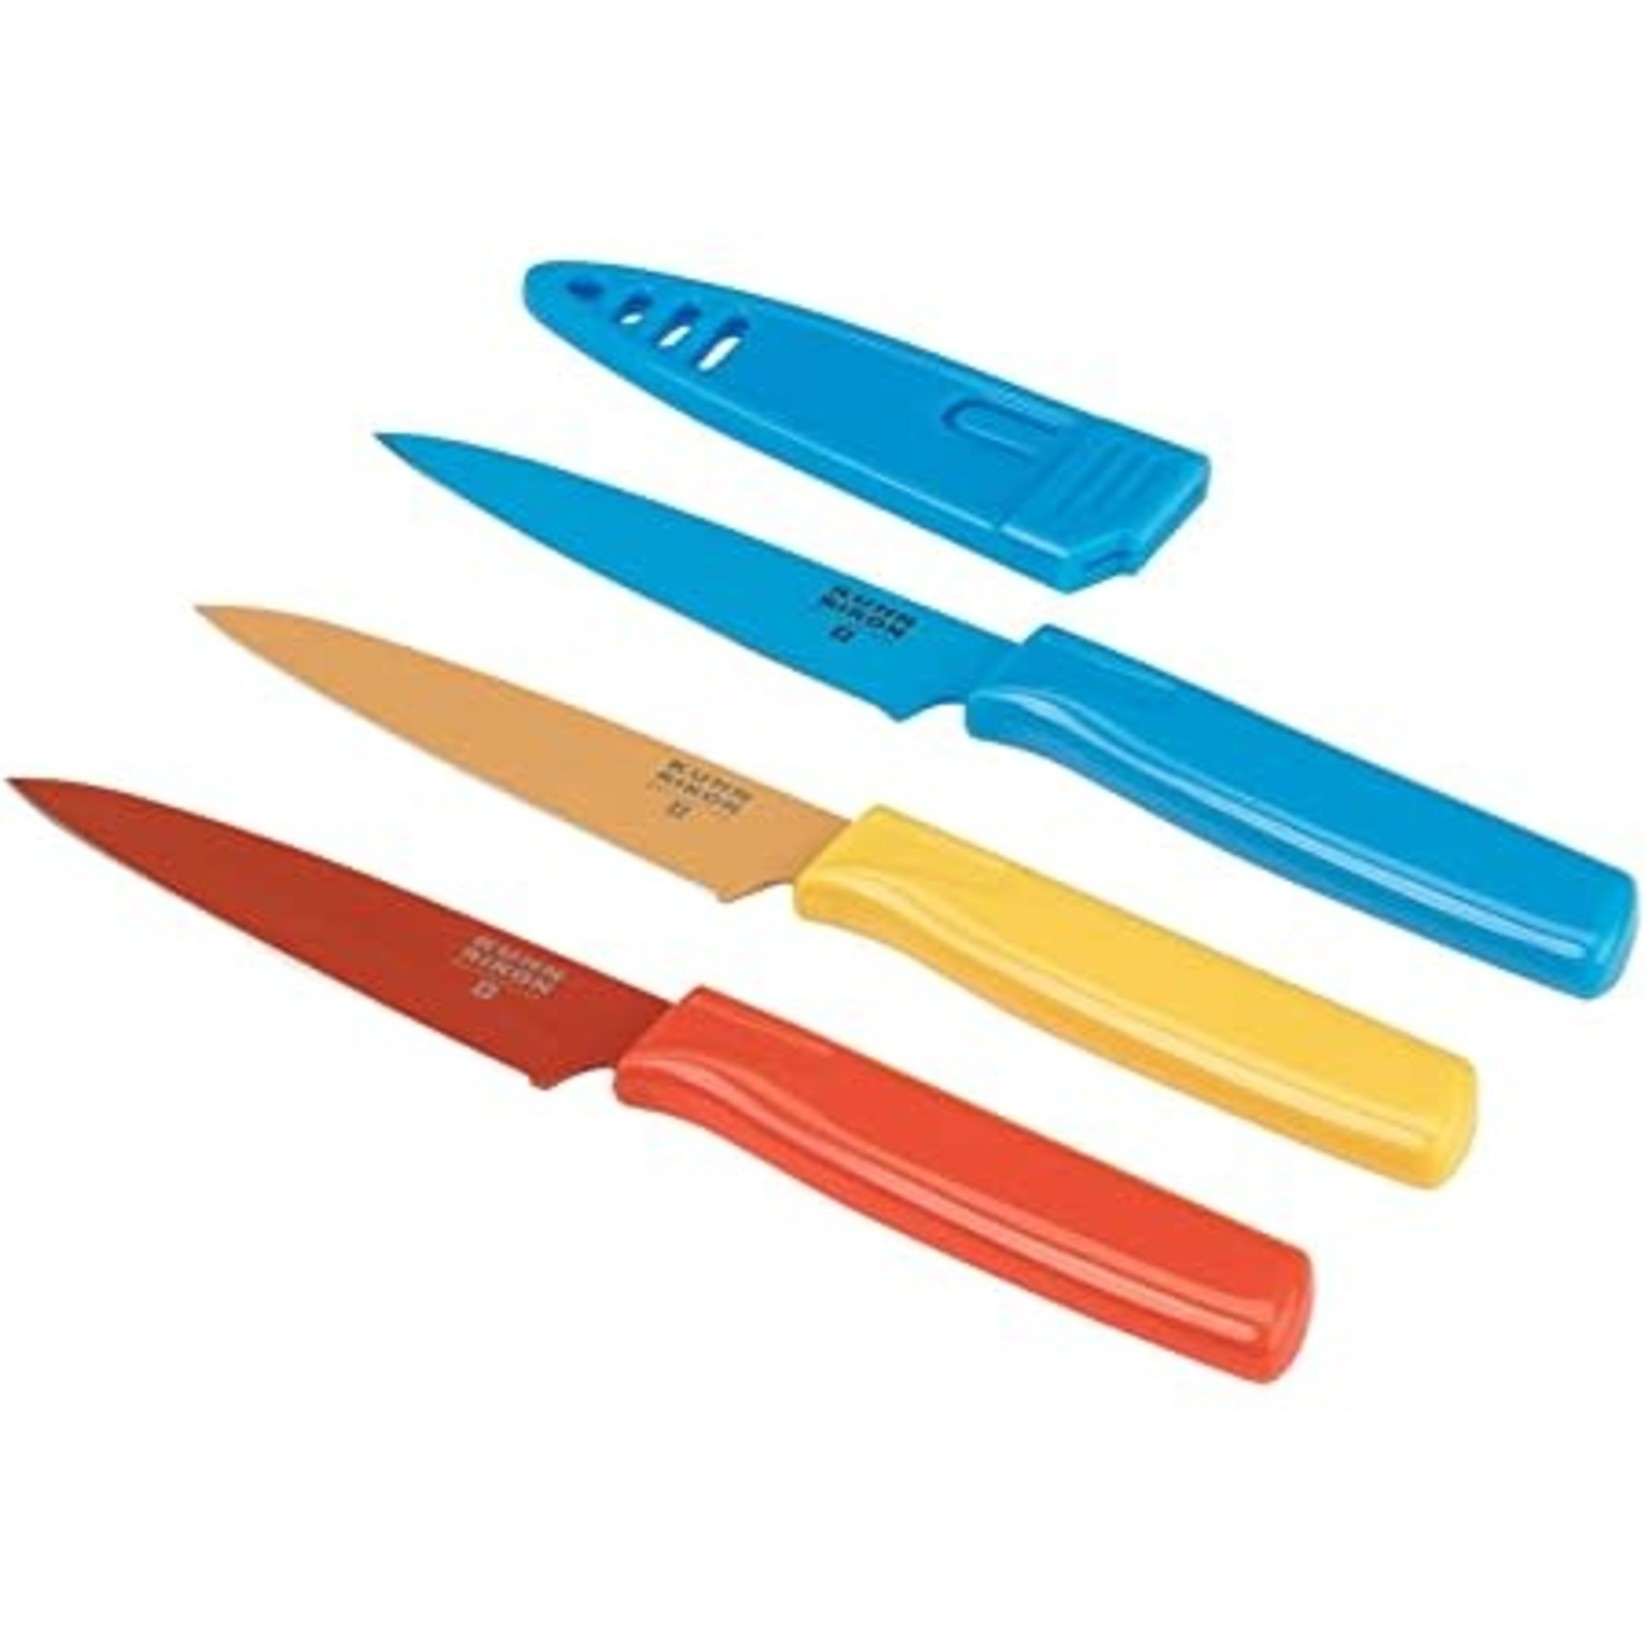 Paring Knife with Colored Blade